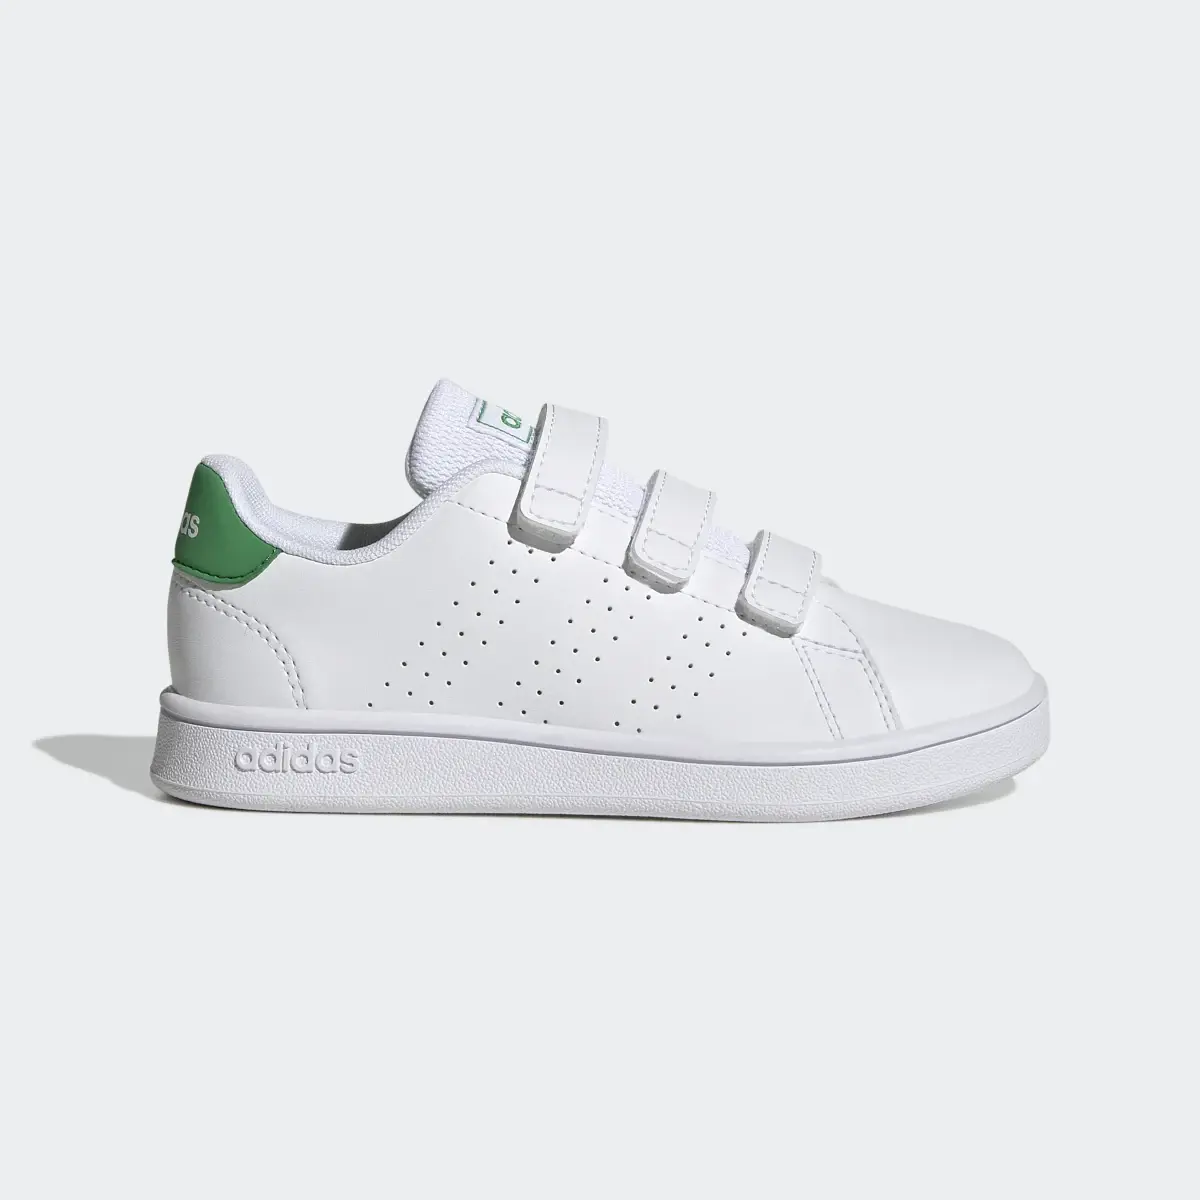 Adidas Advantage Court Lifestyle Hook-and-Loop Schuh. 2